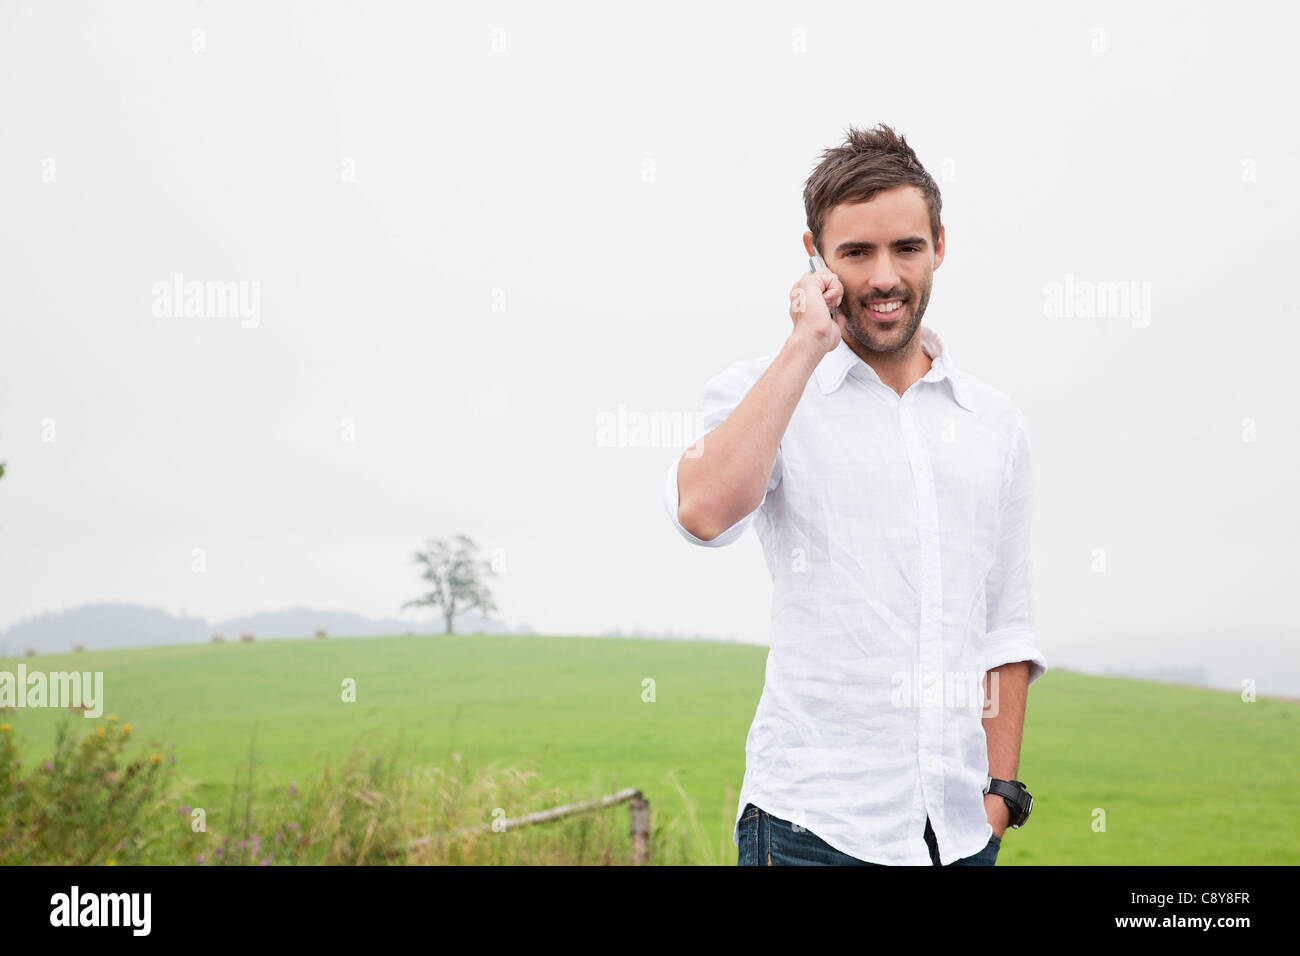 Portrait of young man talking on mobile phone Banque D'Images